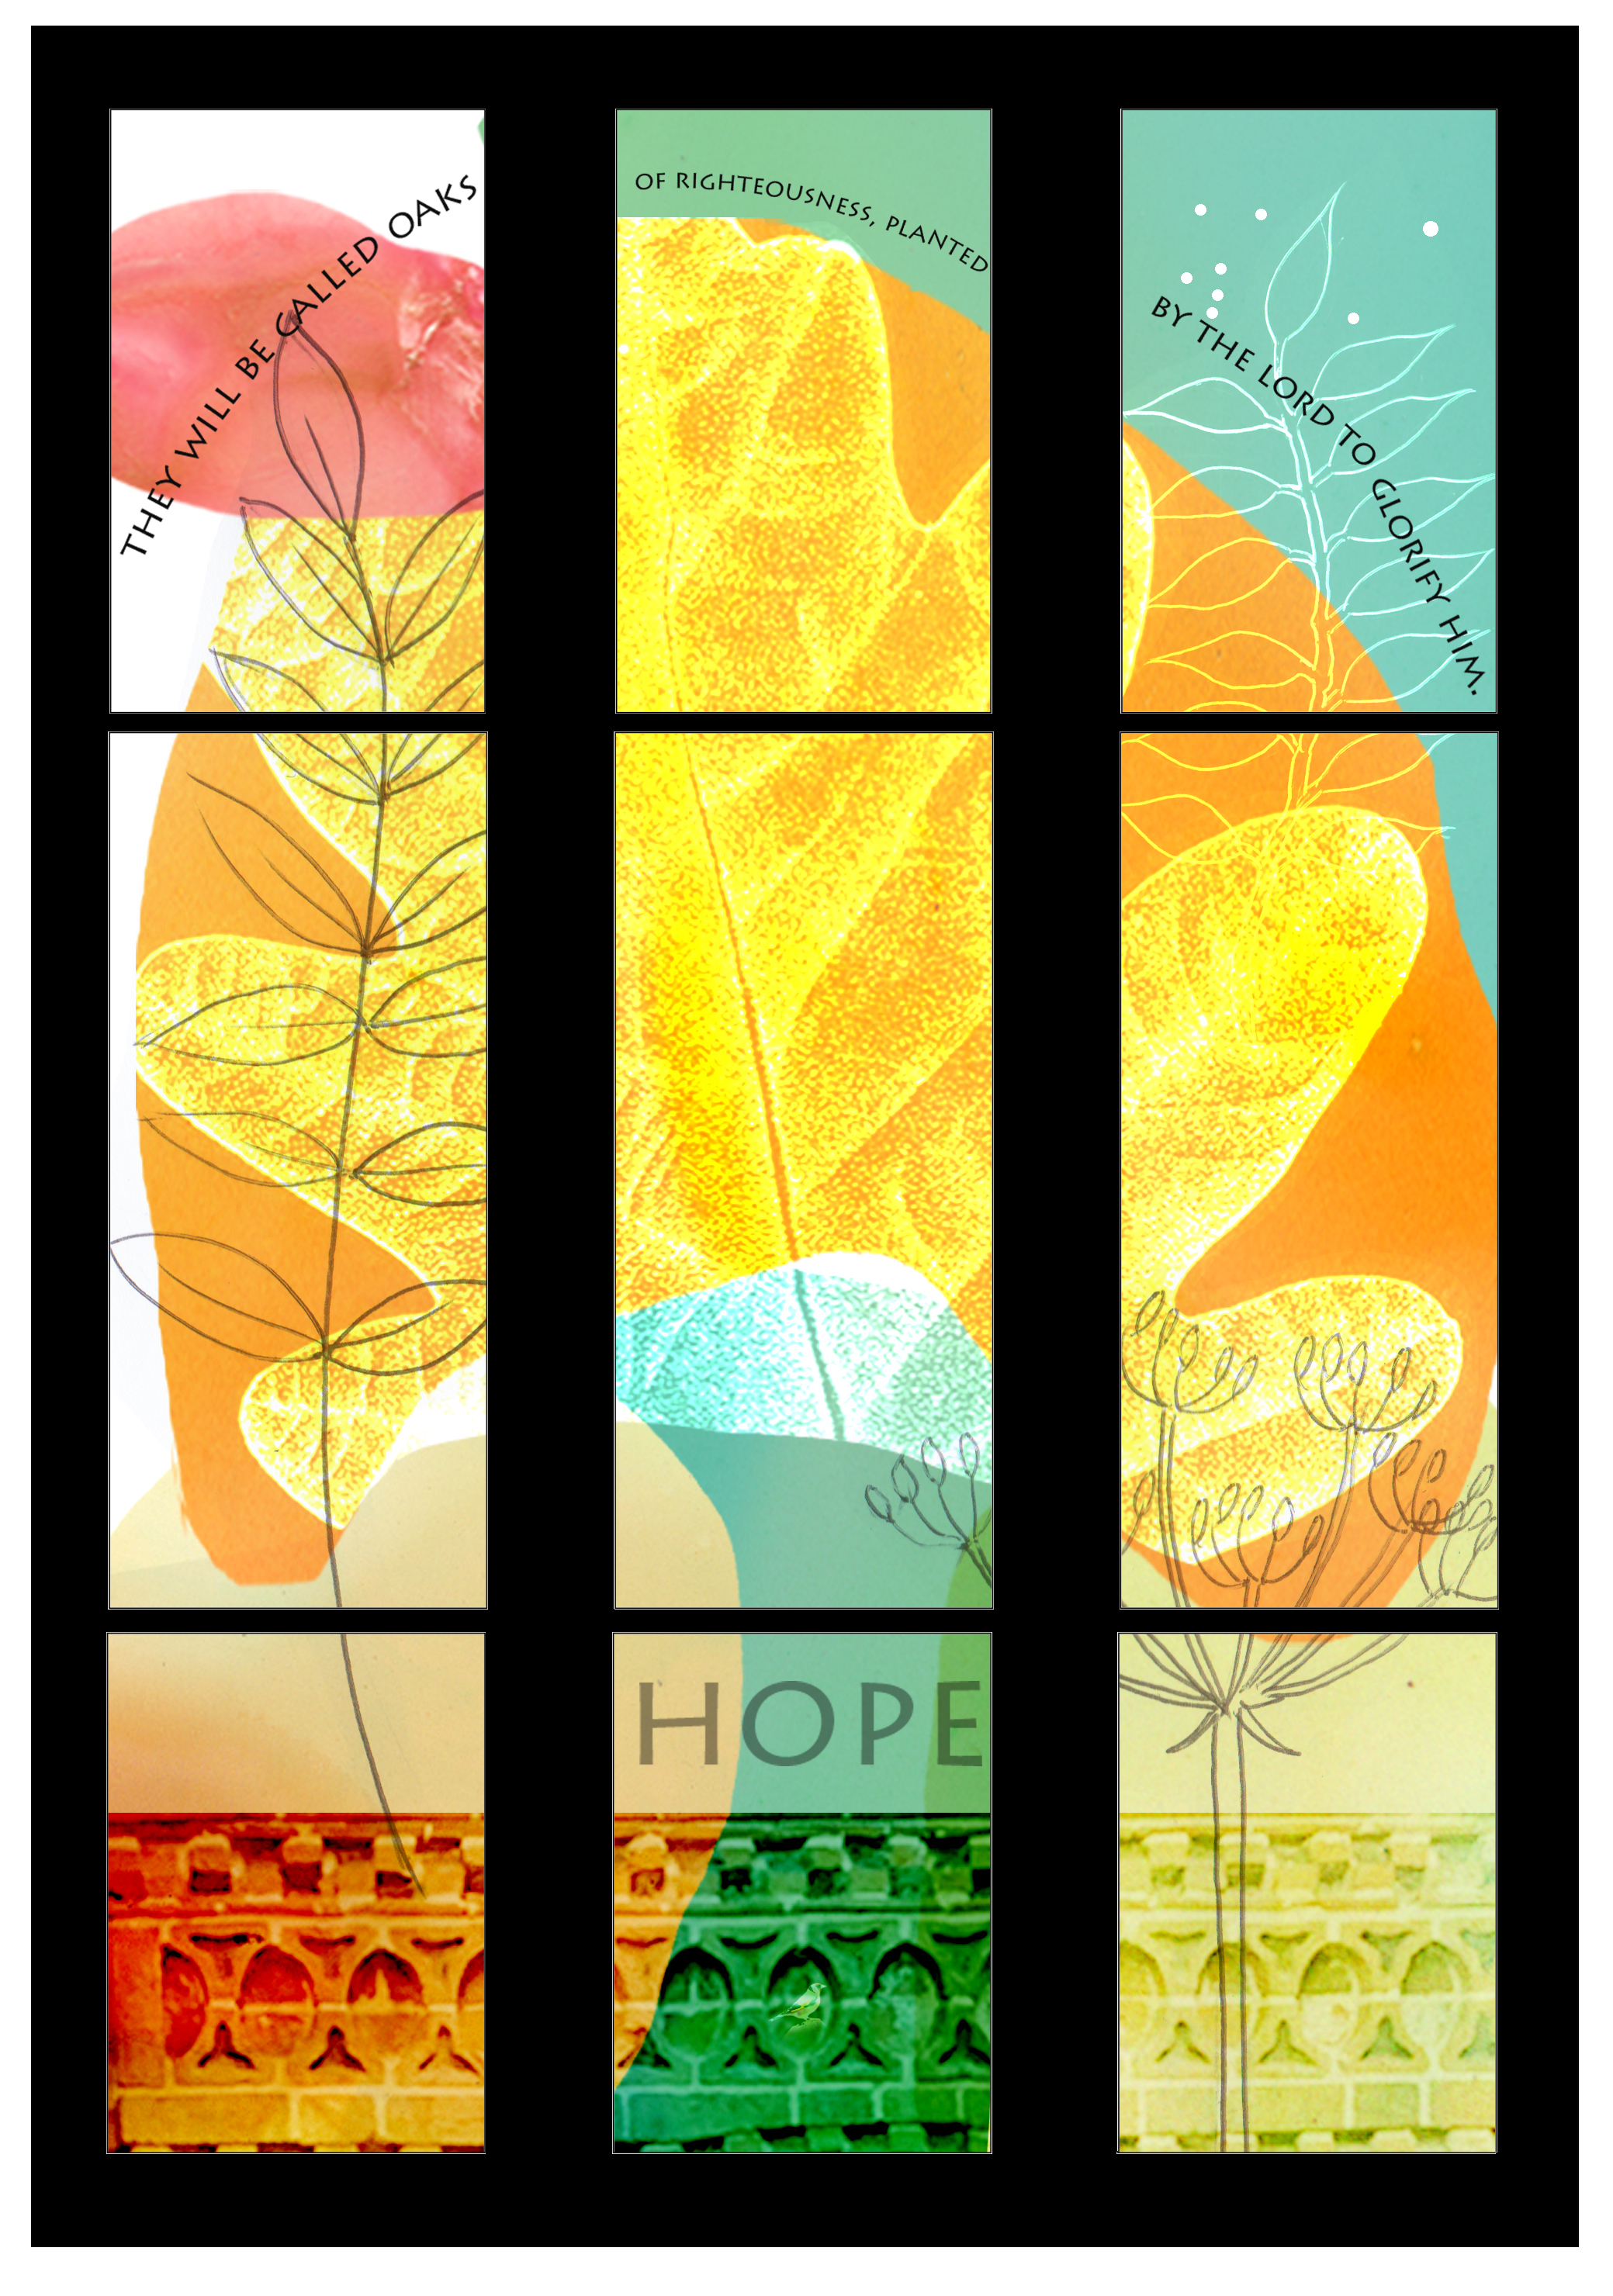 Artist impression of a new modern stained glass window with orange, yellow and turquiose shapes, a big oak leaf, saplings and the word hope